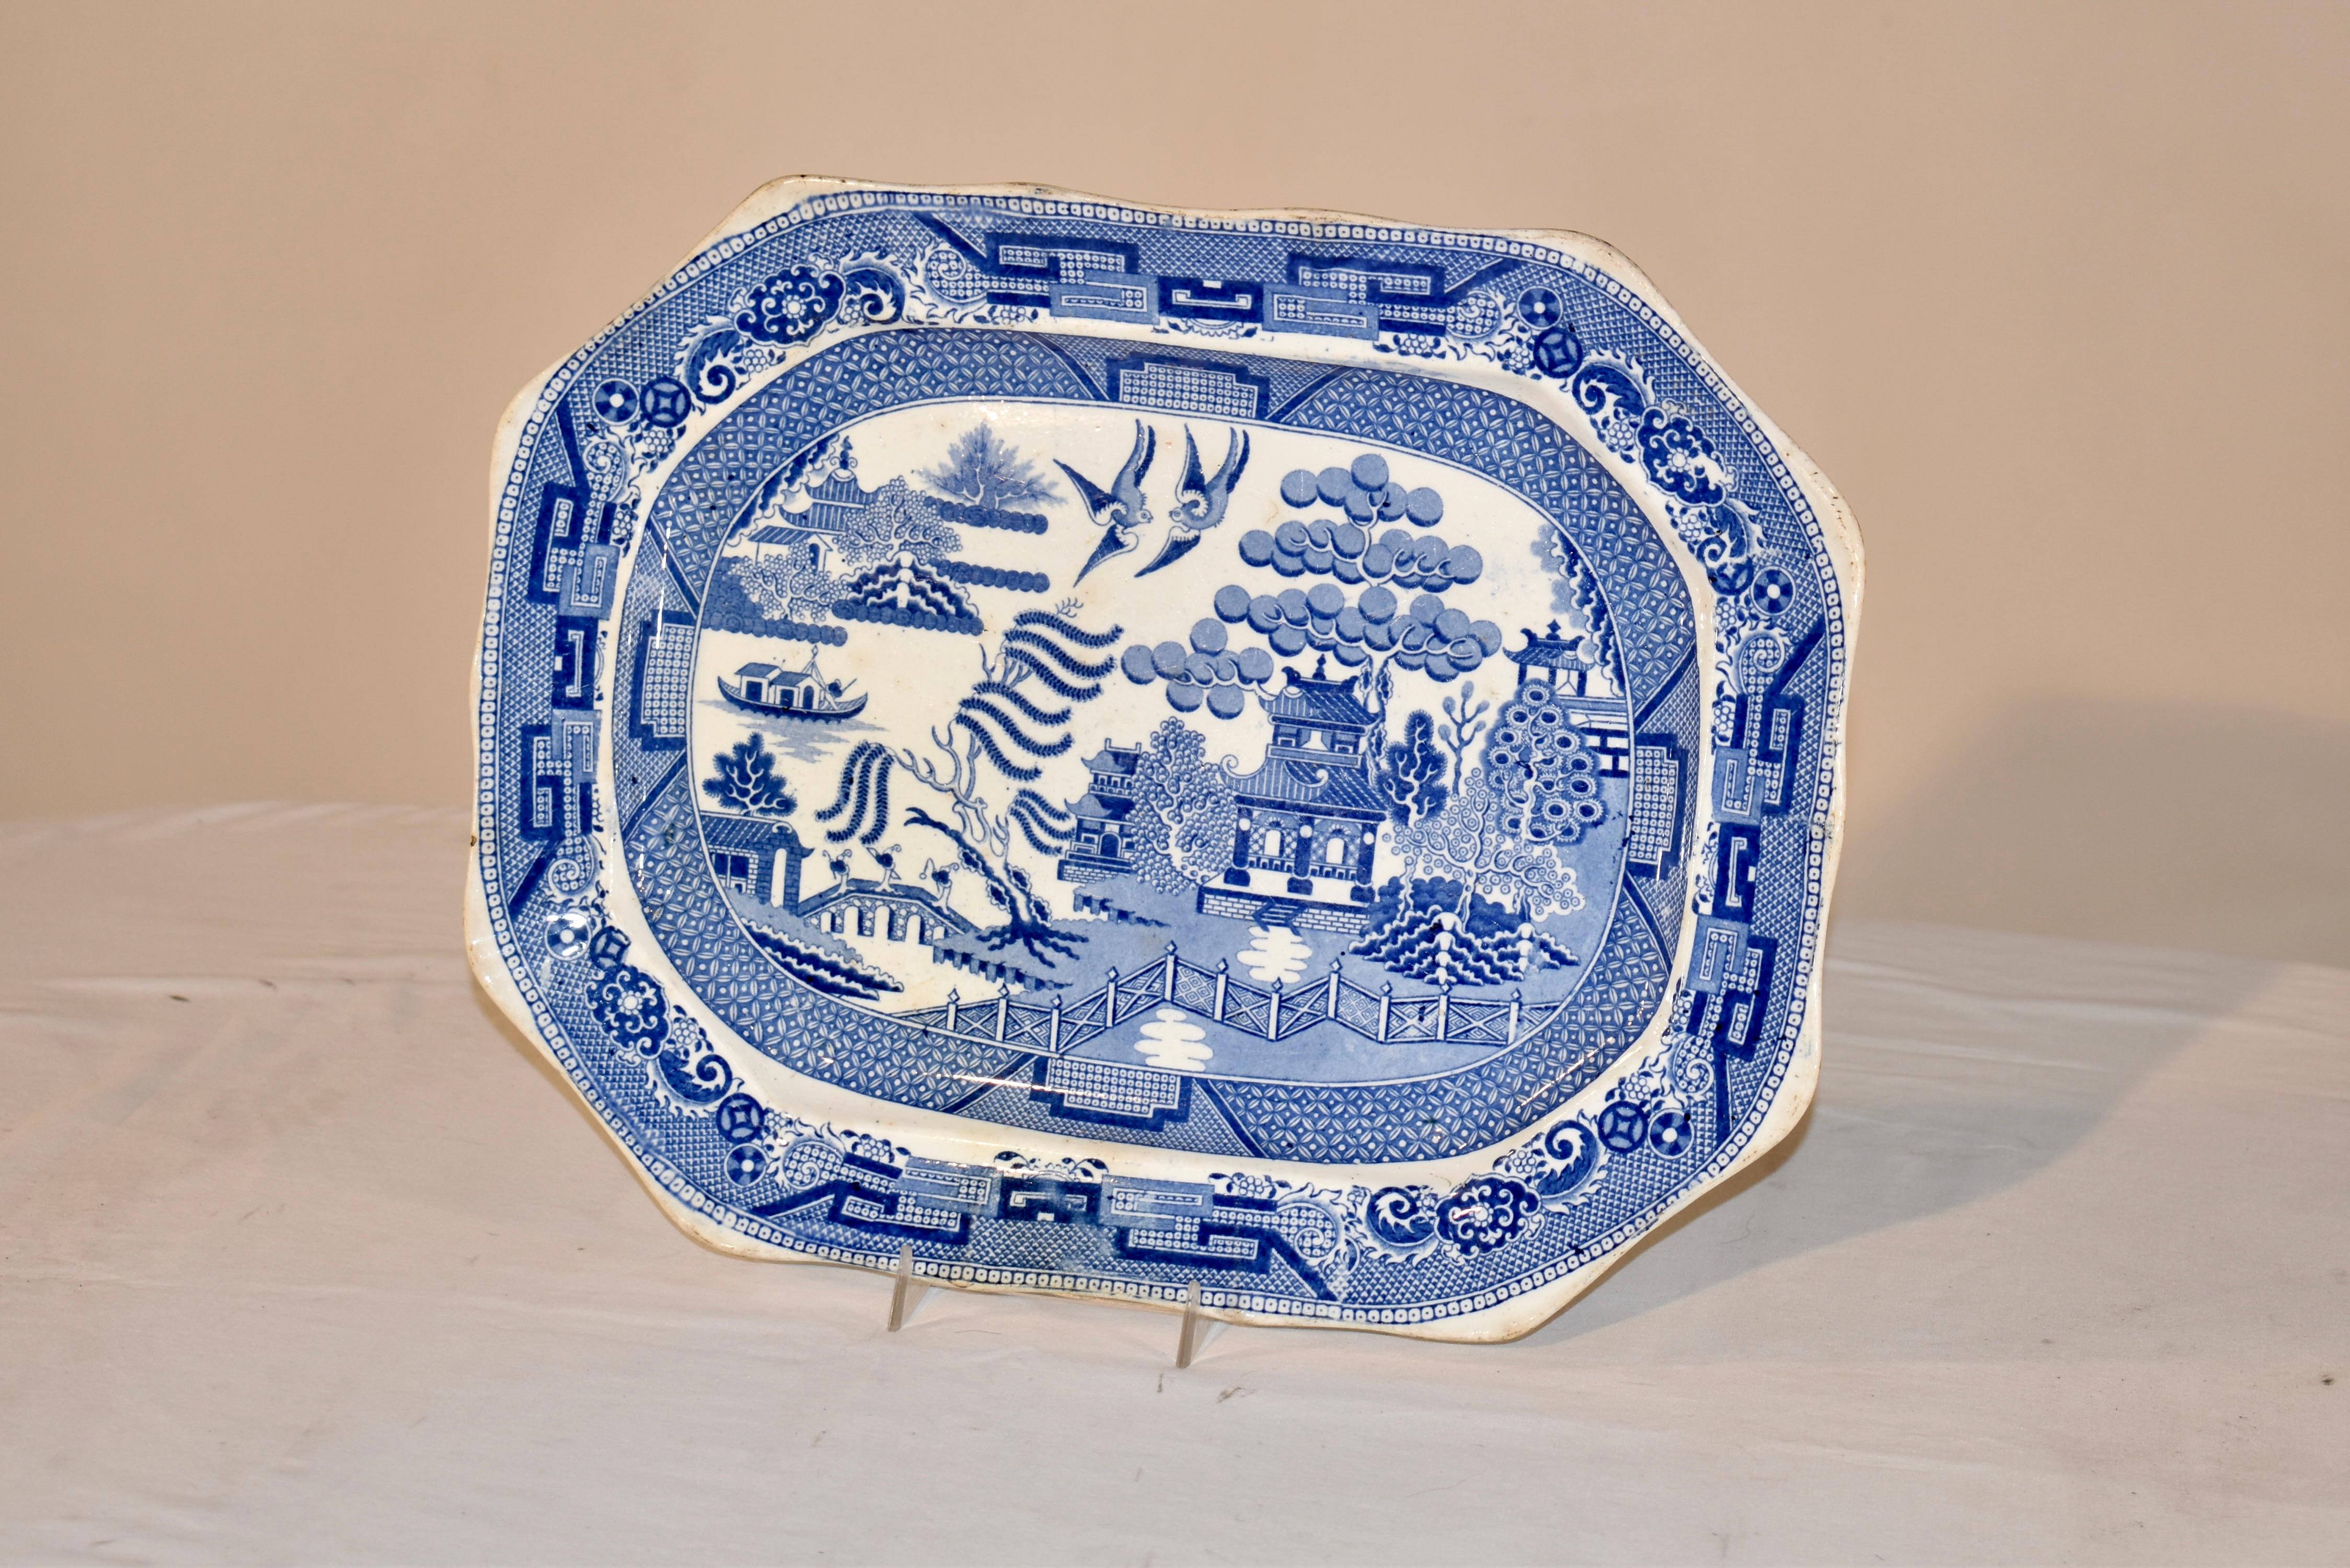 19th century porcelain platter attributed to Davenport.  This platter is decorated in the highly collectible Blue Willow pattern.  The platter is unusual in that it has a lovely shaped border, for more design interest.  On the back of the platter,